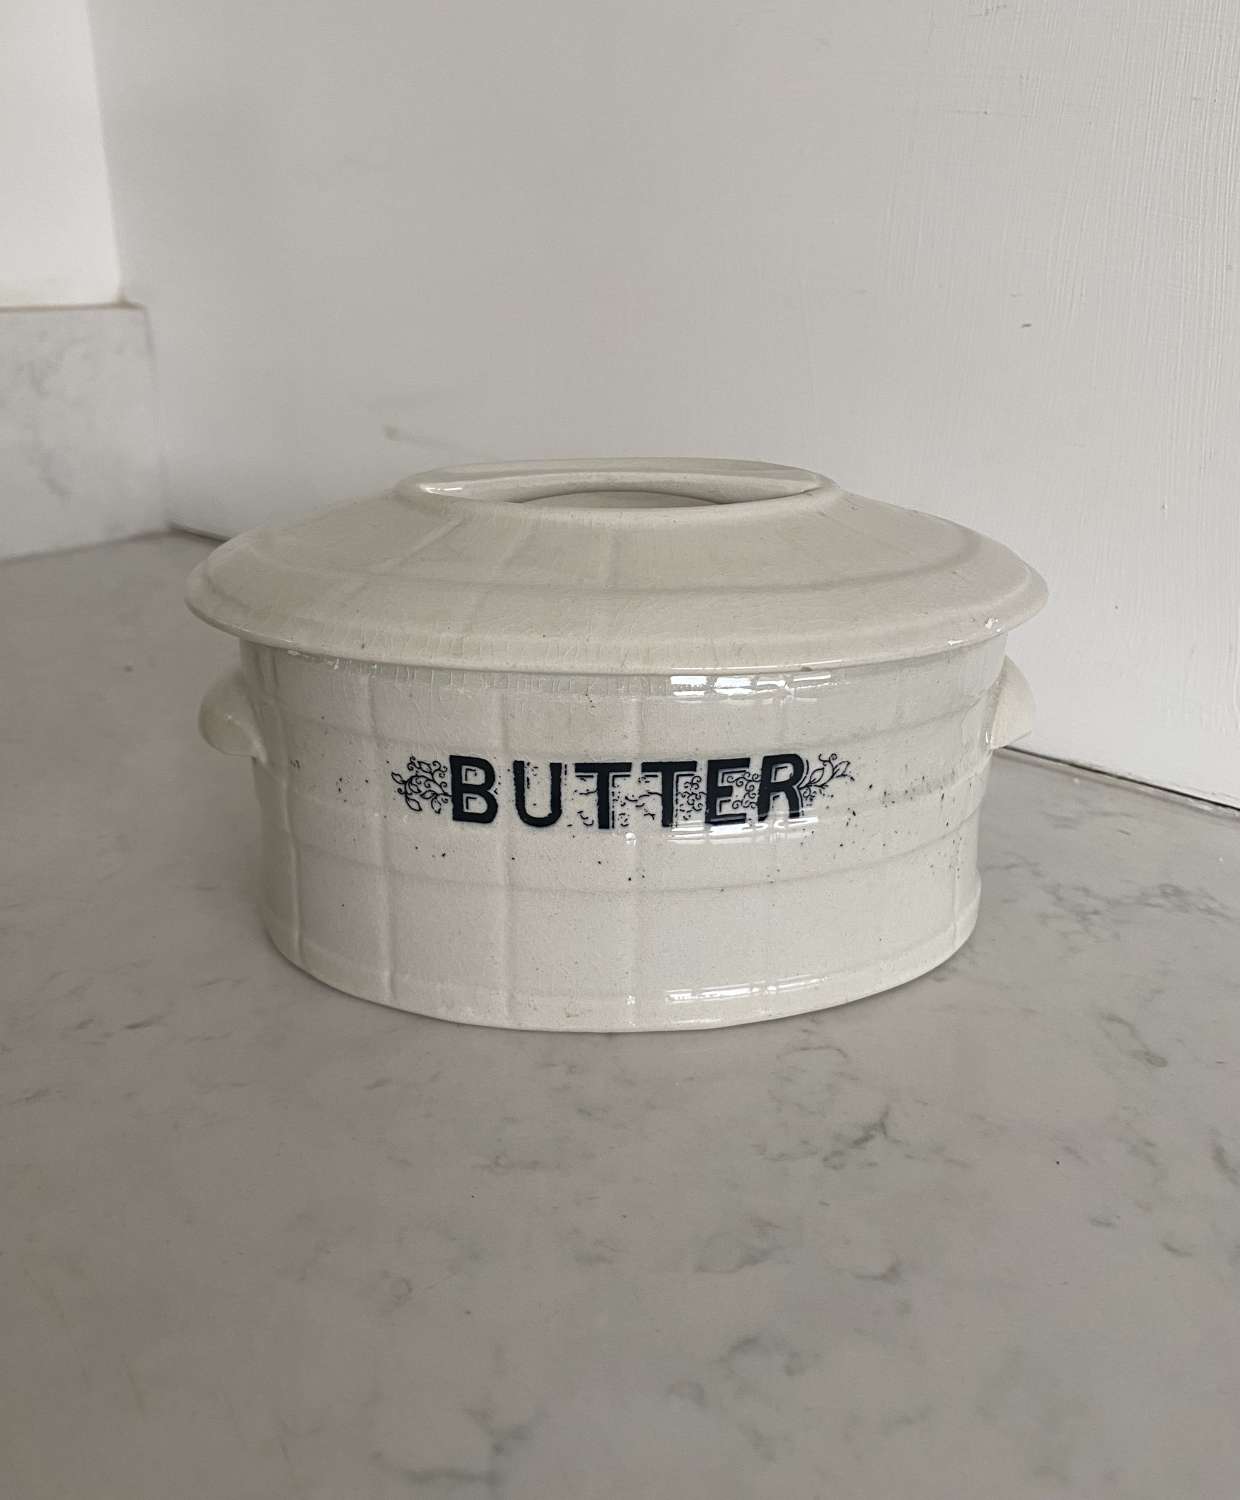 Superb Rarer Small Size Victorian White Ironstone Butter Dish